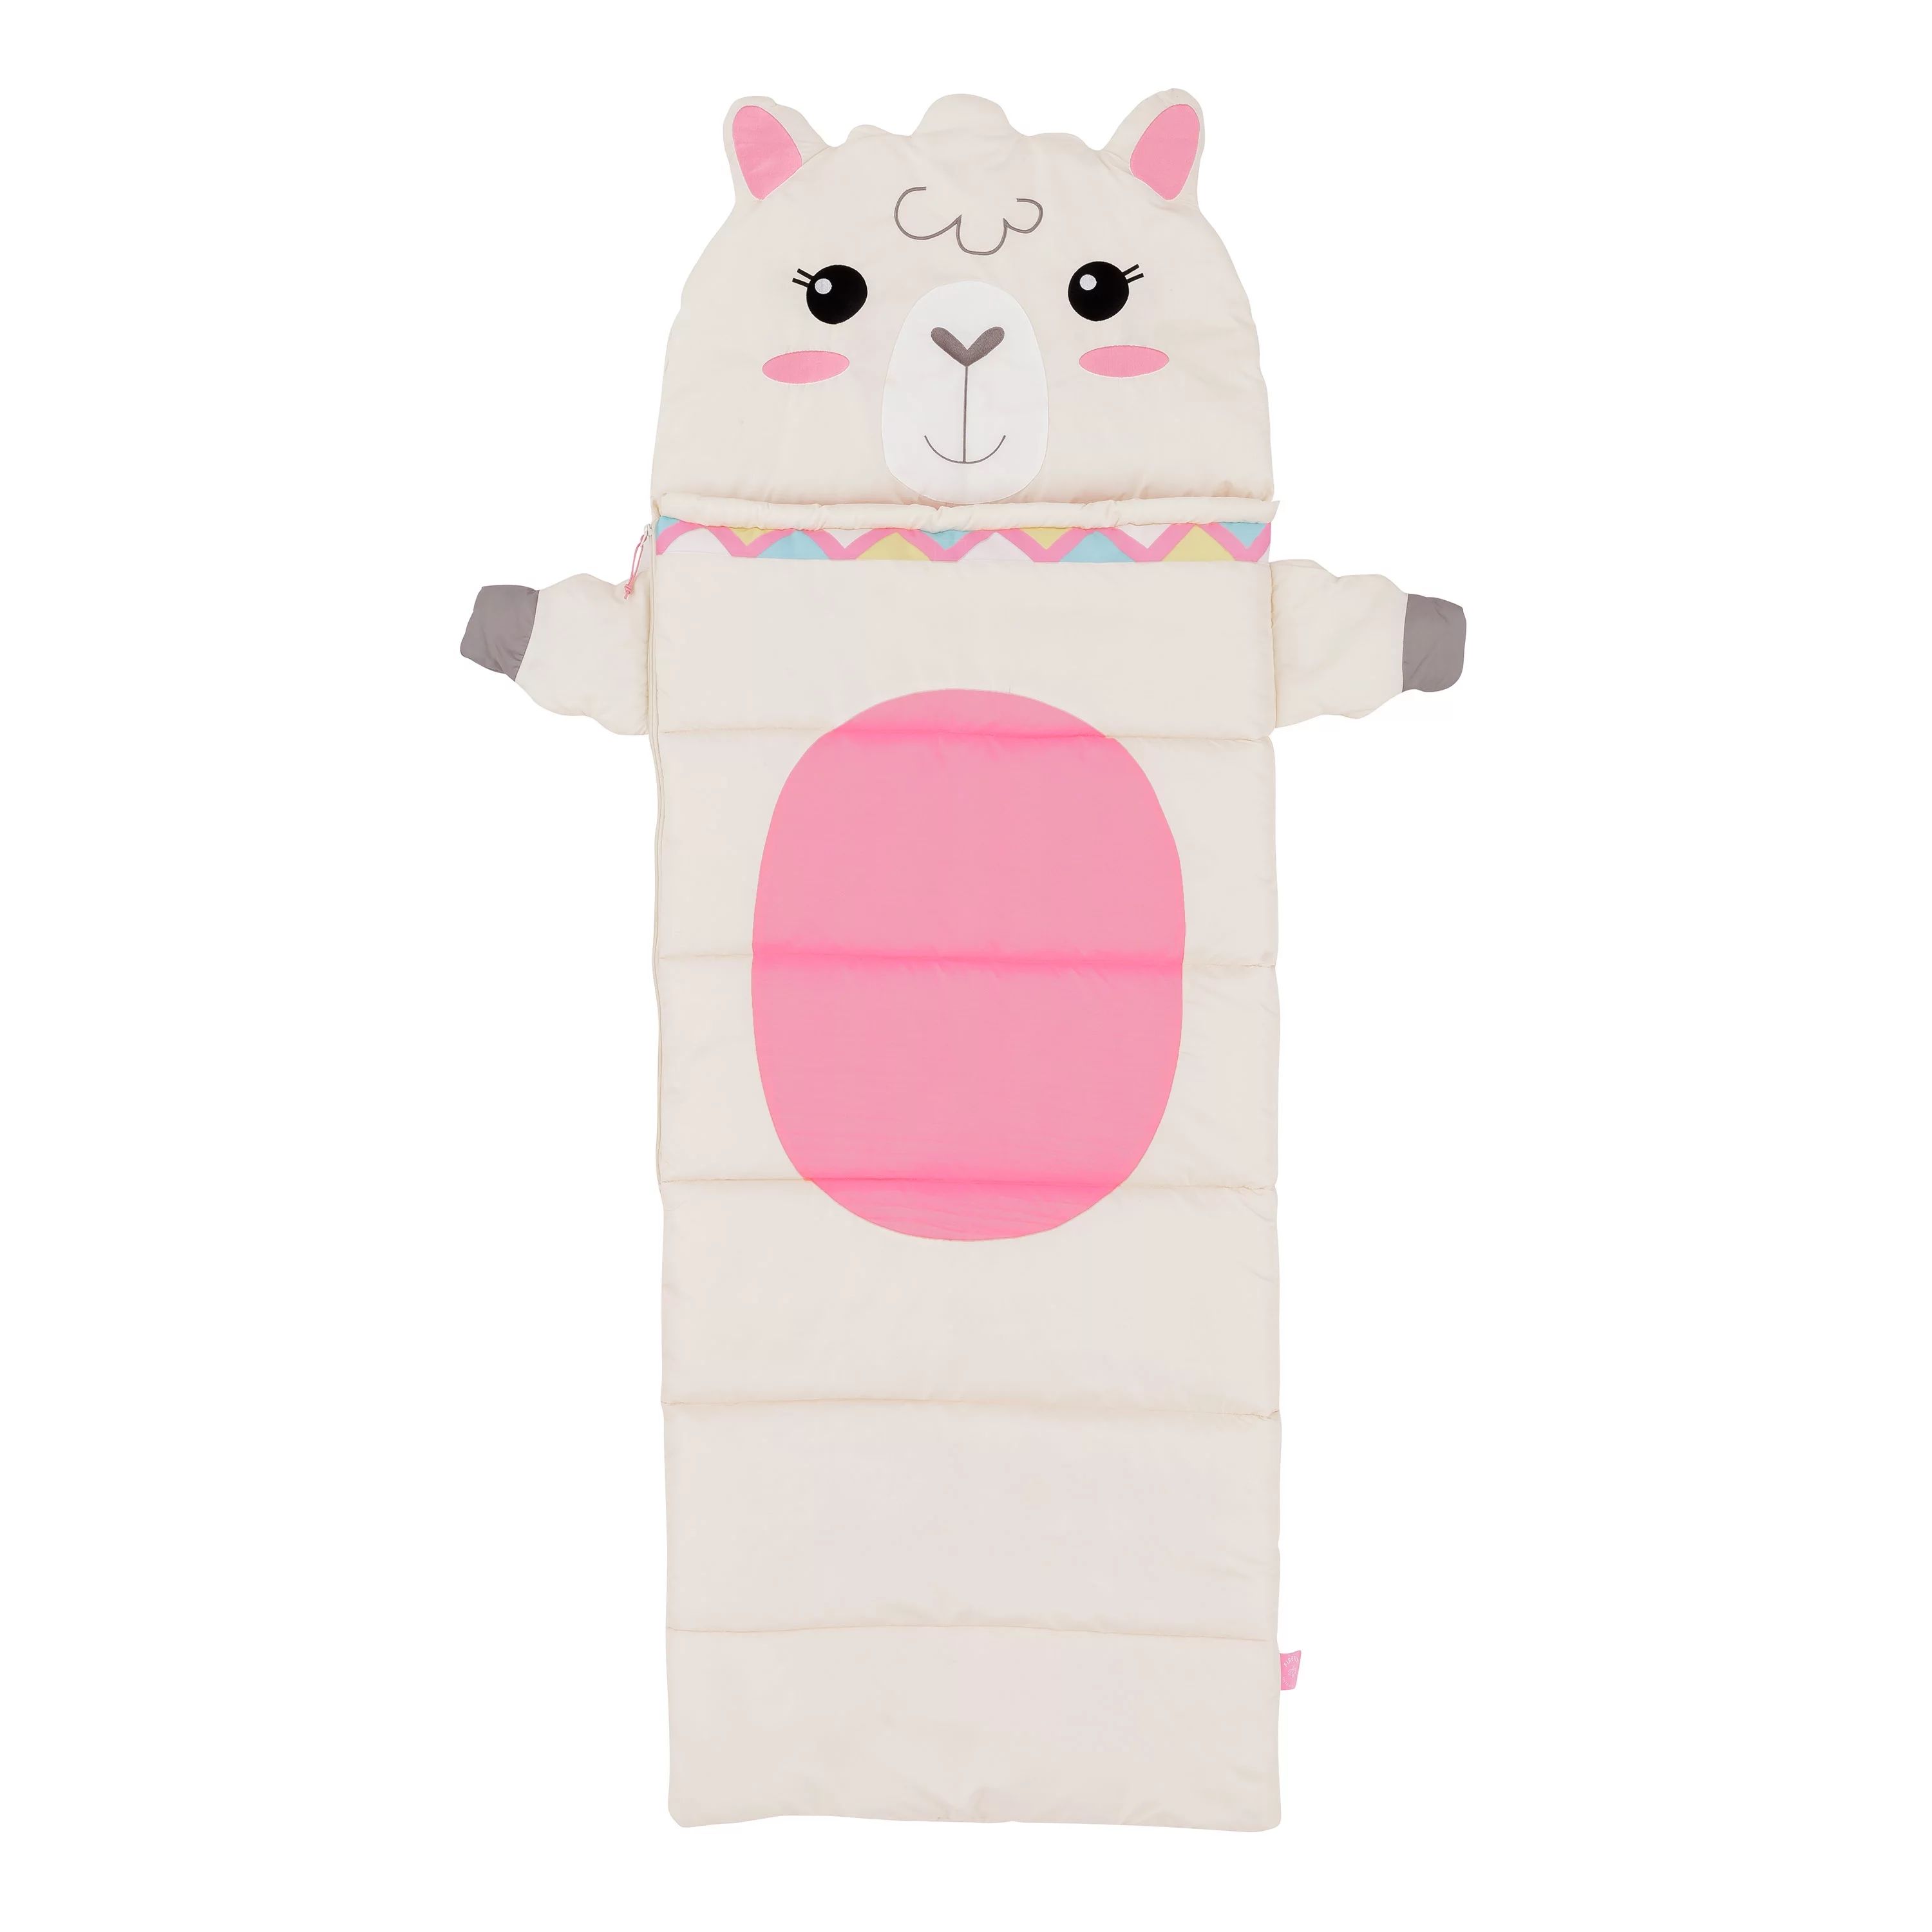 Firefly! Outdoor Gear Izzie the Llama Kid's Sleeping Bag - Off White/Pink (65 in. x 24 in.) - Wal... | Walmart (US)